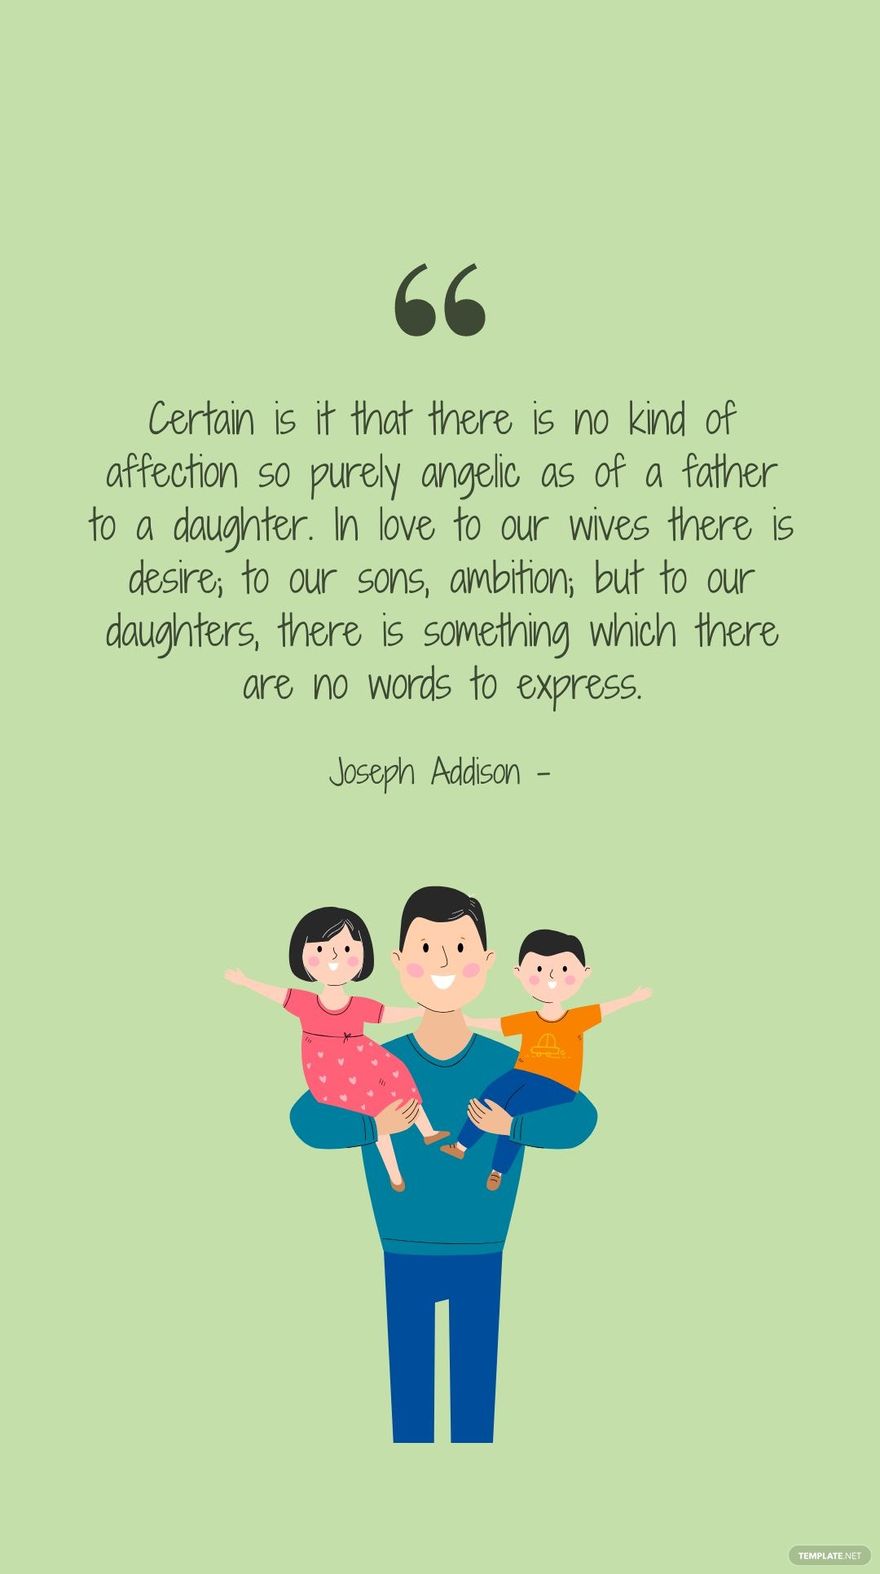 JOSEPH ADDISON - Certain is it that there is no kind of affection so purely angelic as of a father to a daughter. In love to our wives there is desire; to our sons, ambition; but to our daughters, the